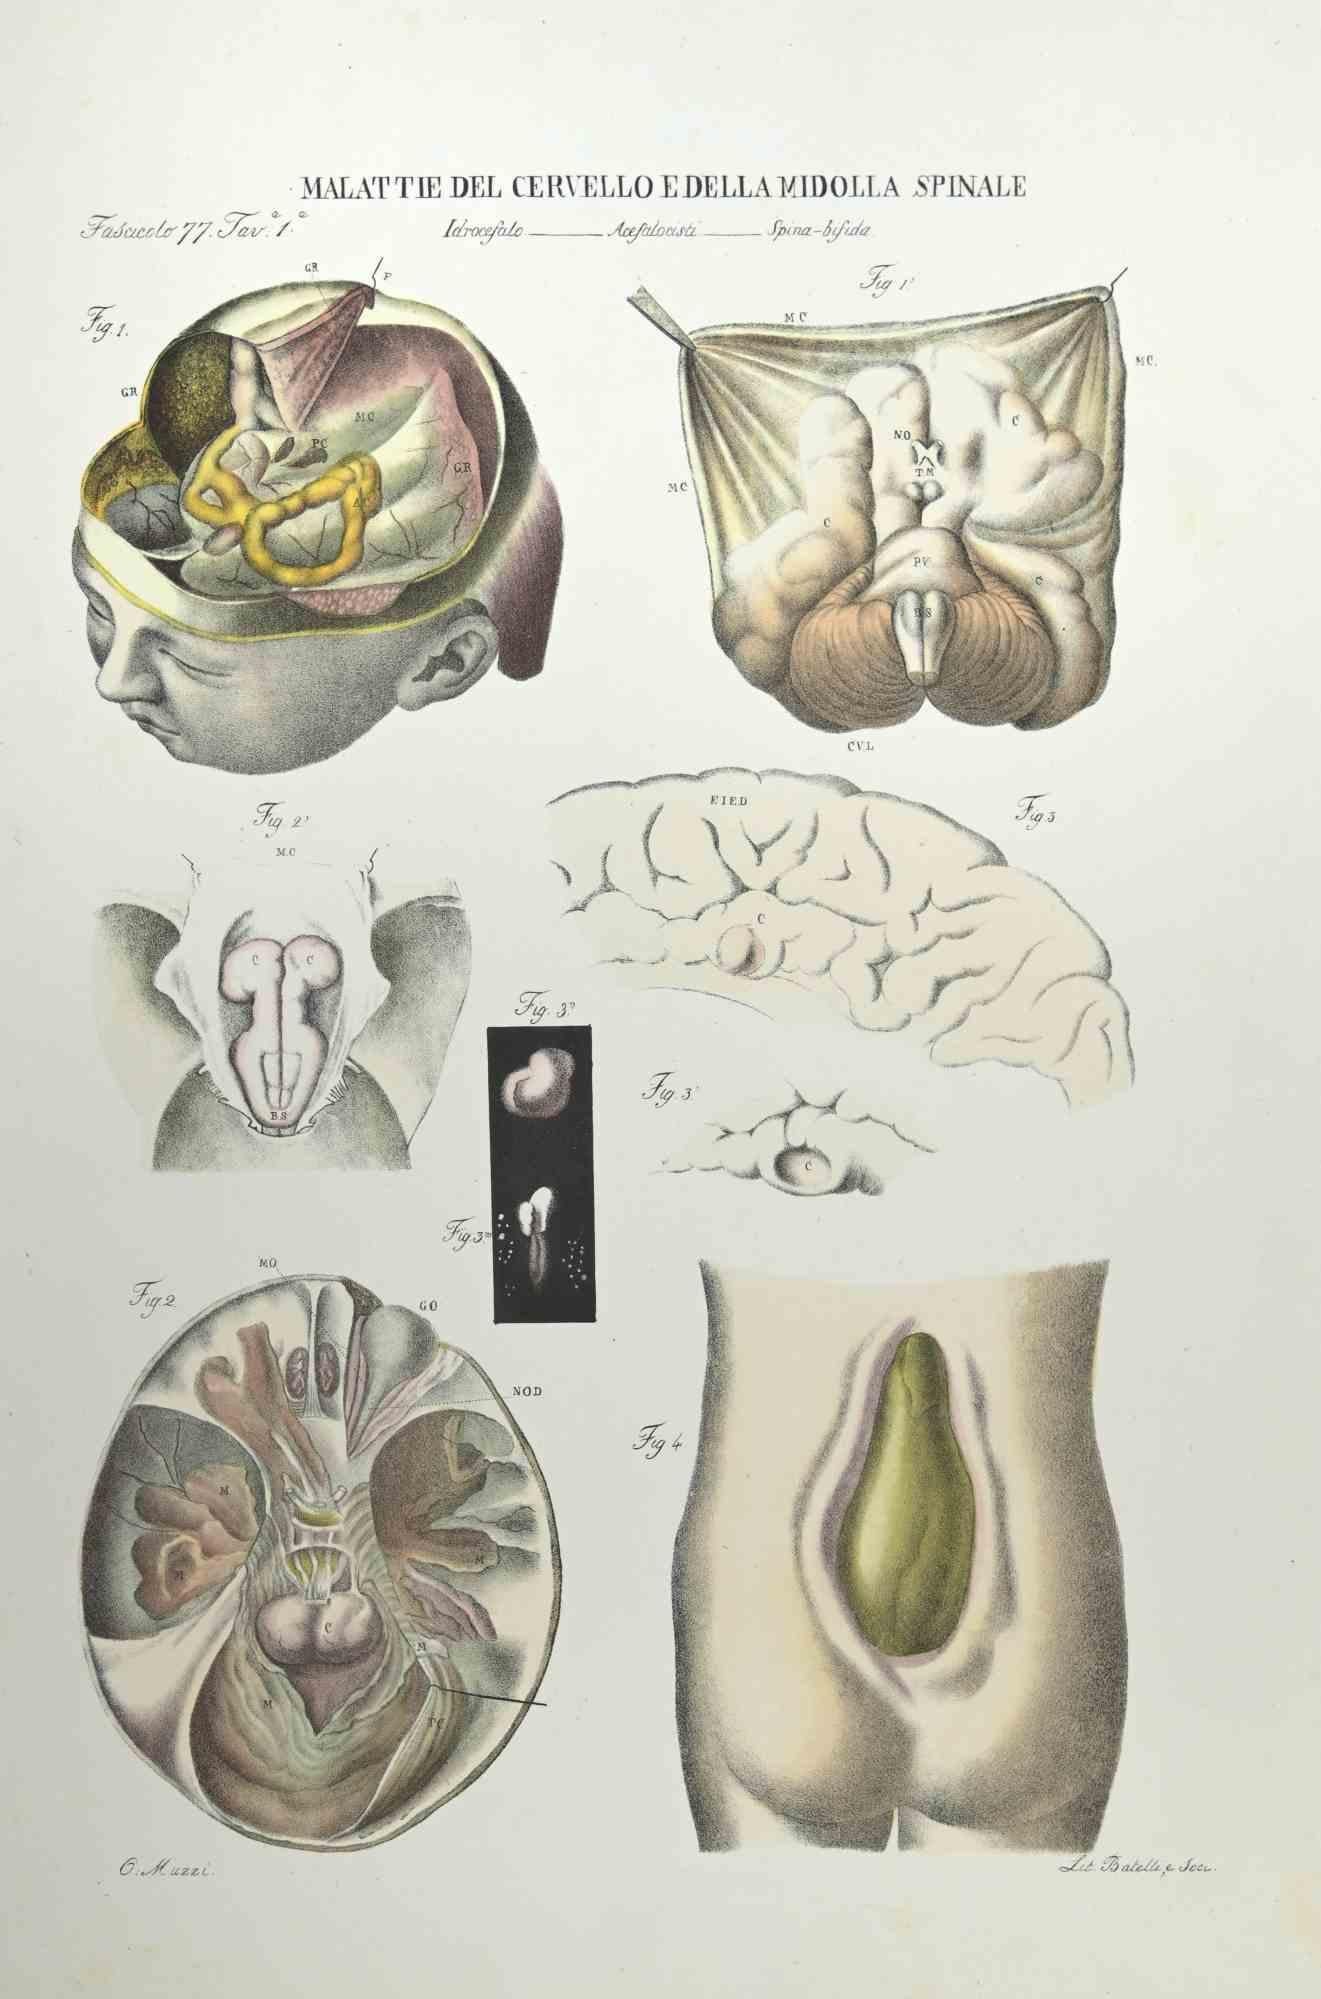 Diseases of the Brain and Spinal Cord  is a lithograph hand colored by Ottavio Muzzi for the edition of Antoine Chazal,Human Anatomy, Printers Batelli and Ridolfi, realized in 1843.

Signed on plate on the lower left margin.

The artwork belongs to